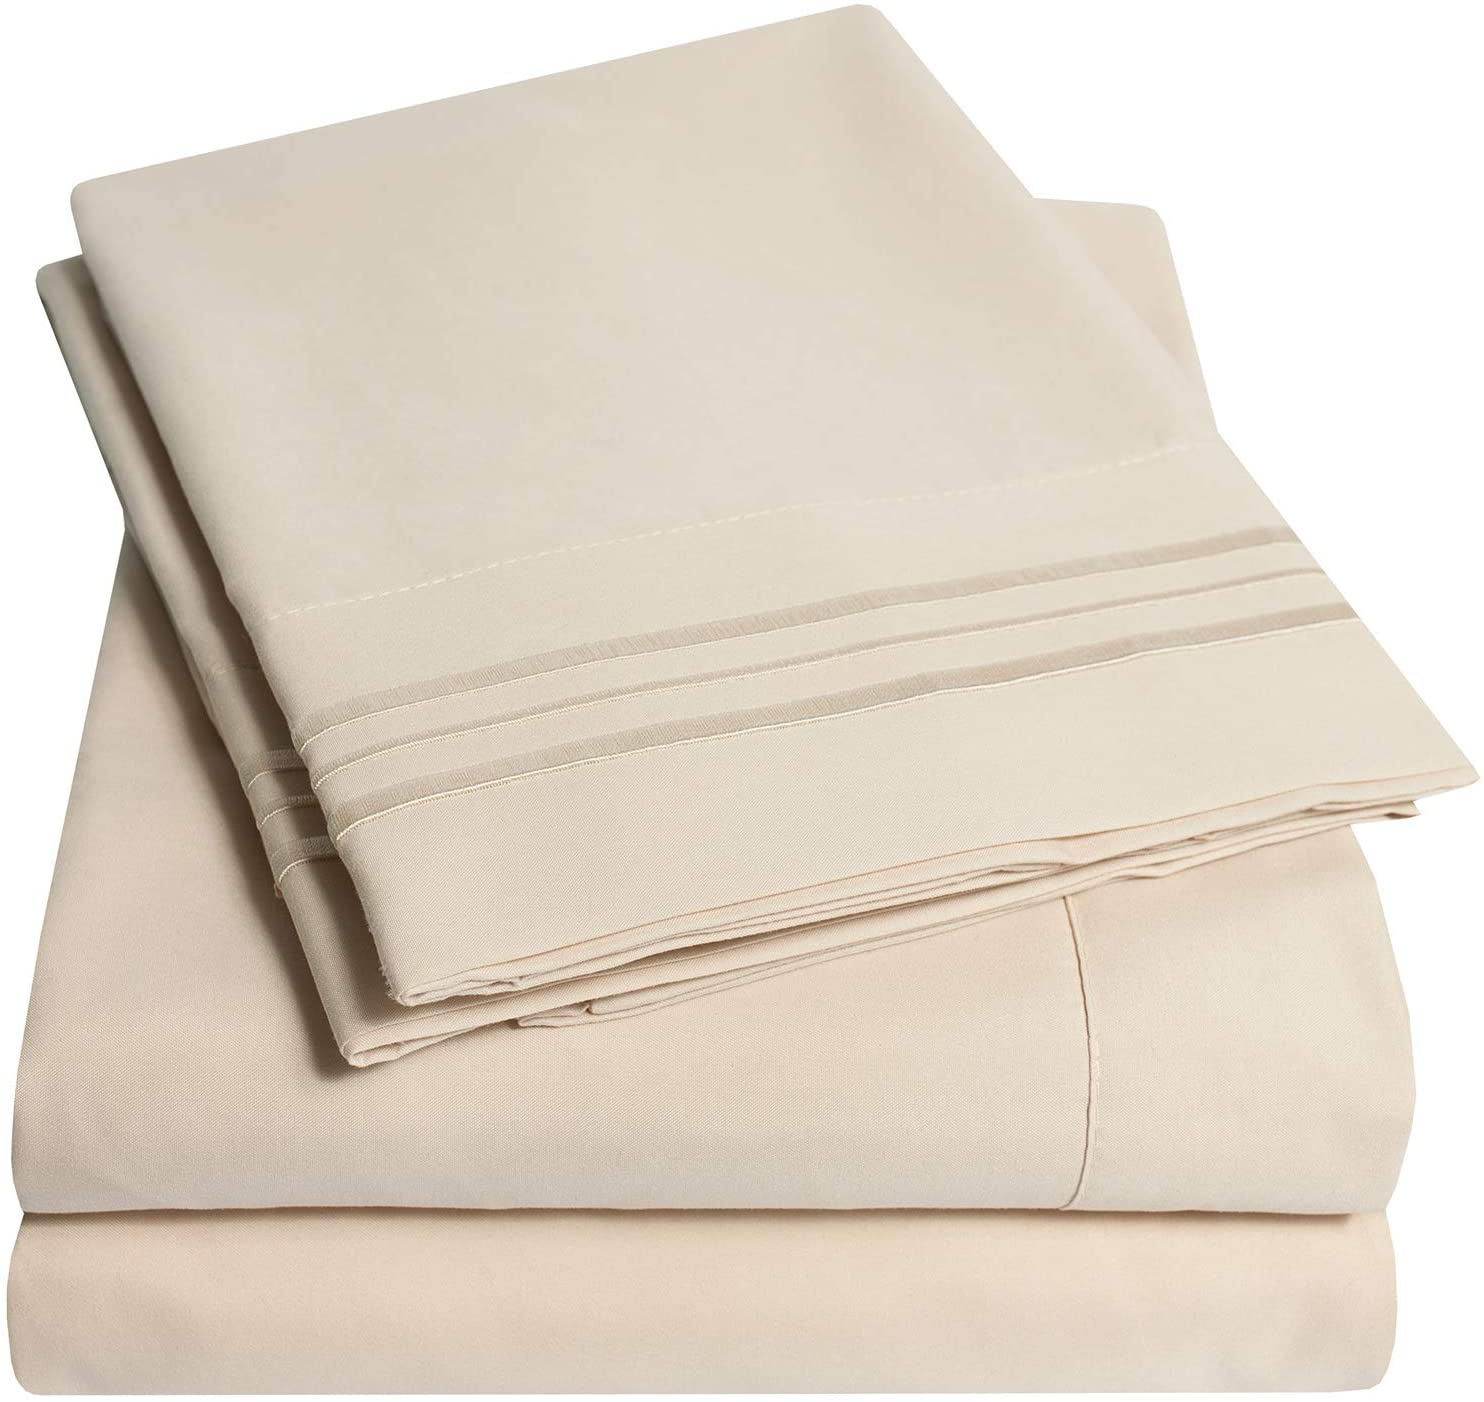 1500 Supreme Collection Extra Deep Pocket Sheets Set - Luxury Soft Bed Sheets, Wrinkle Free, Hypoallergenic Bedding, over 40 Colors, 21 Inch Extra Deep Pocket, Twin, Beige